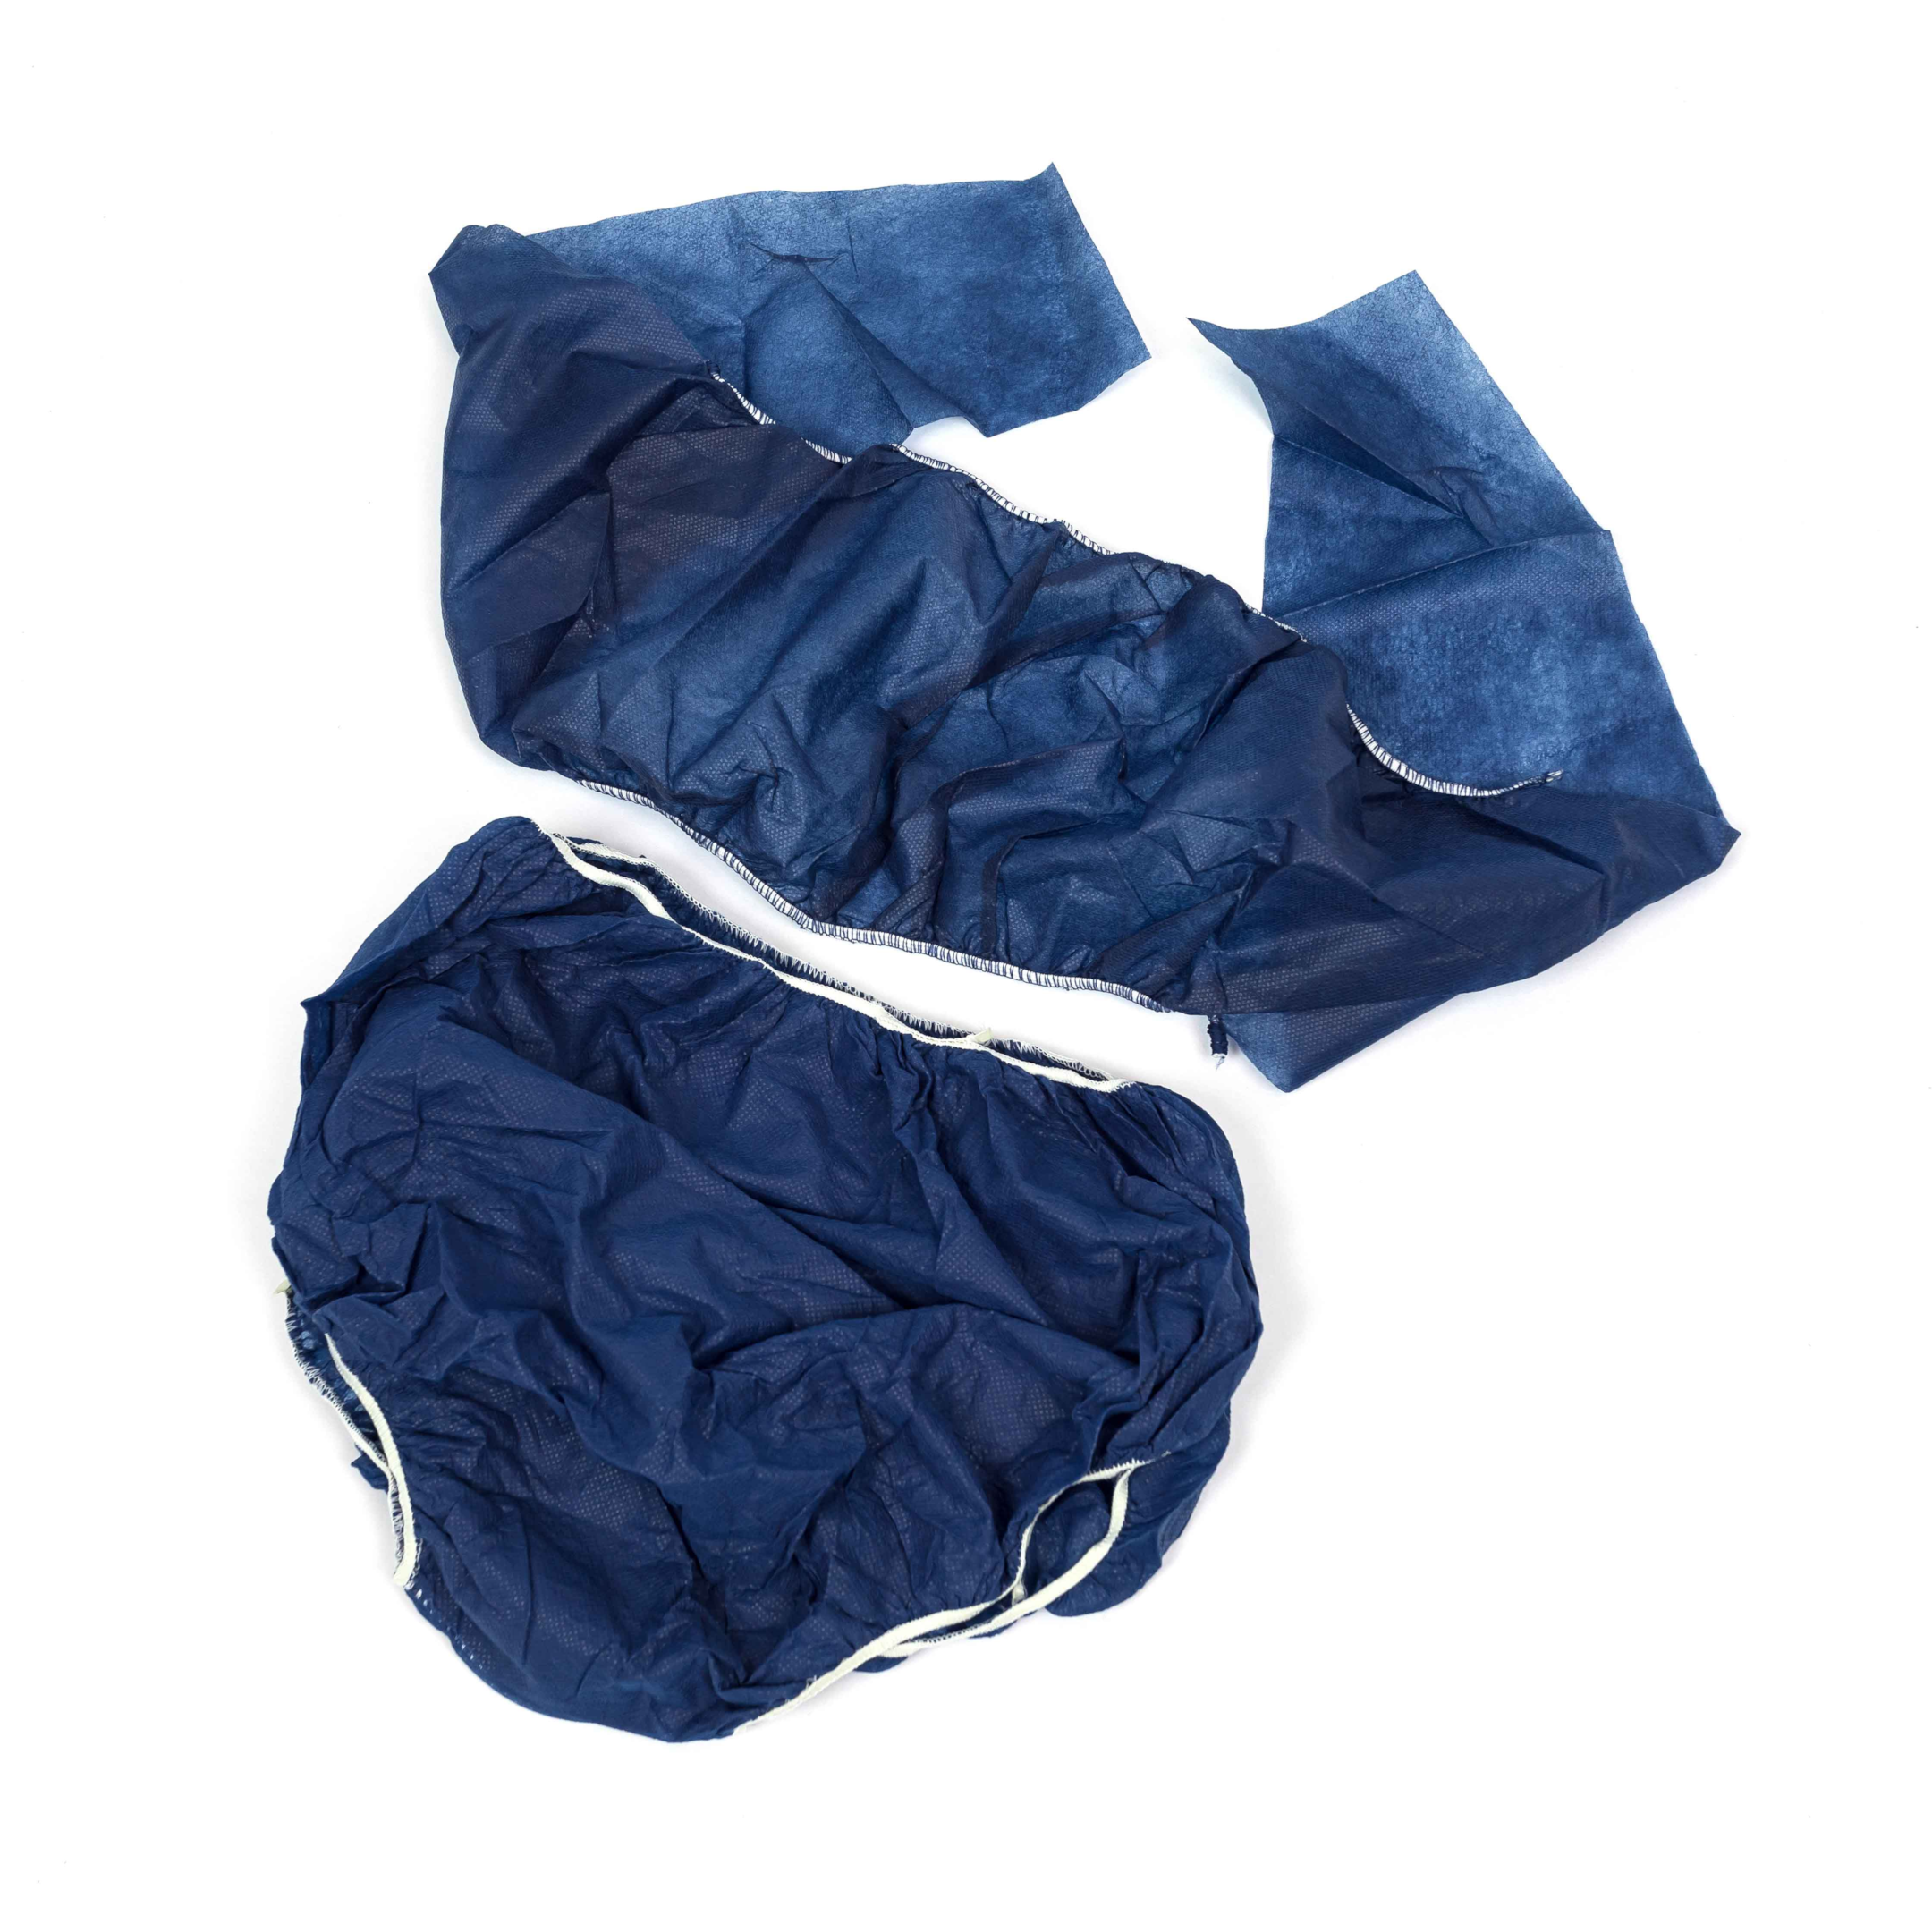 disposable hospital bra, disposable hospital bra Suppliers and